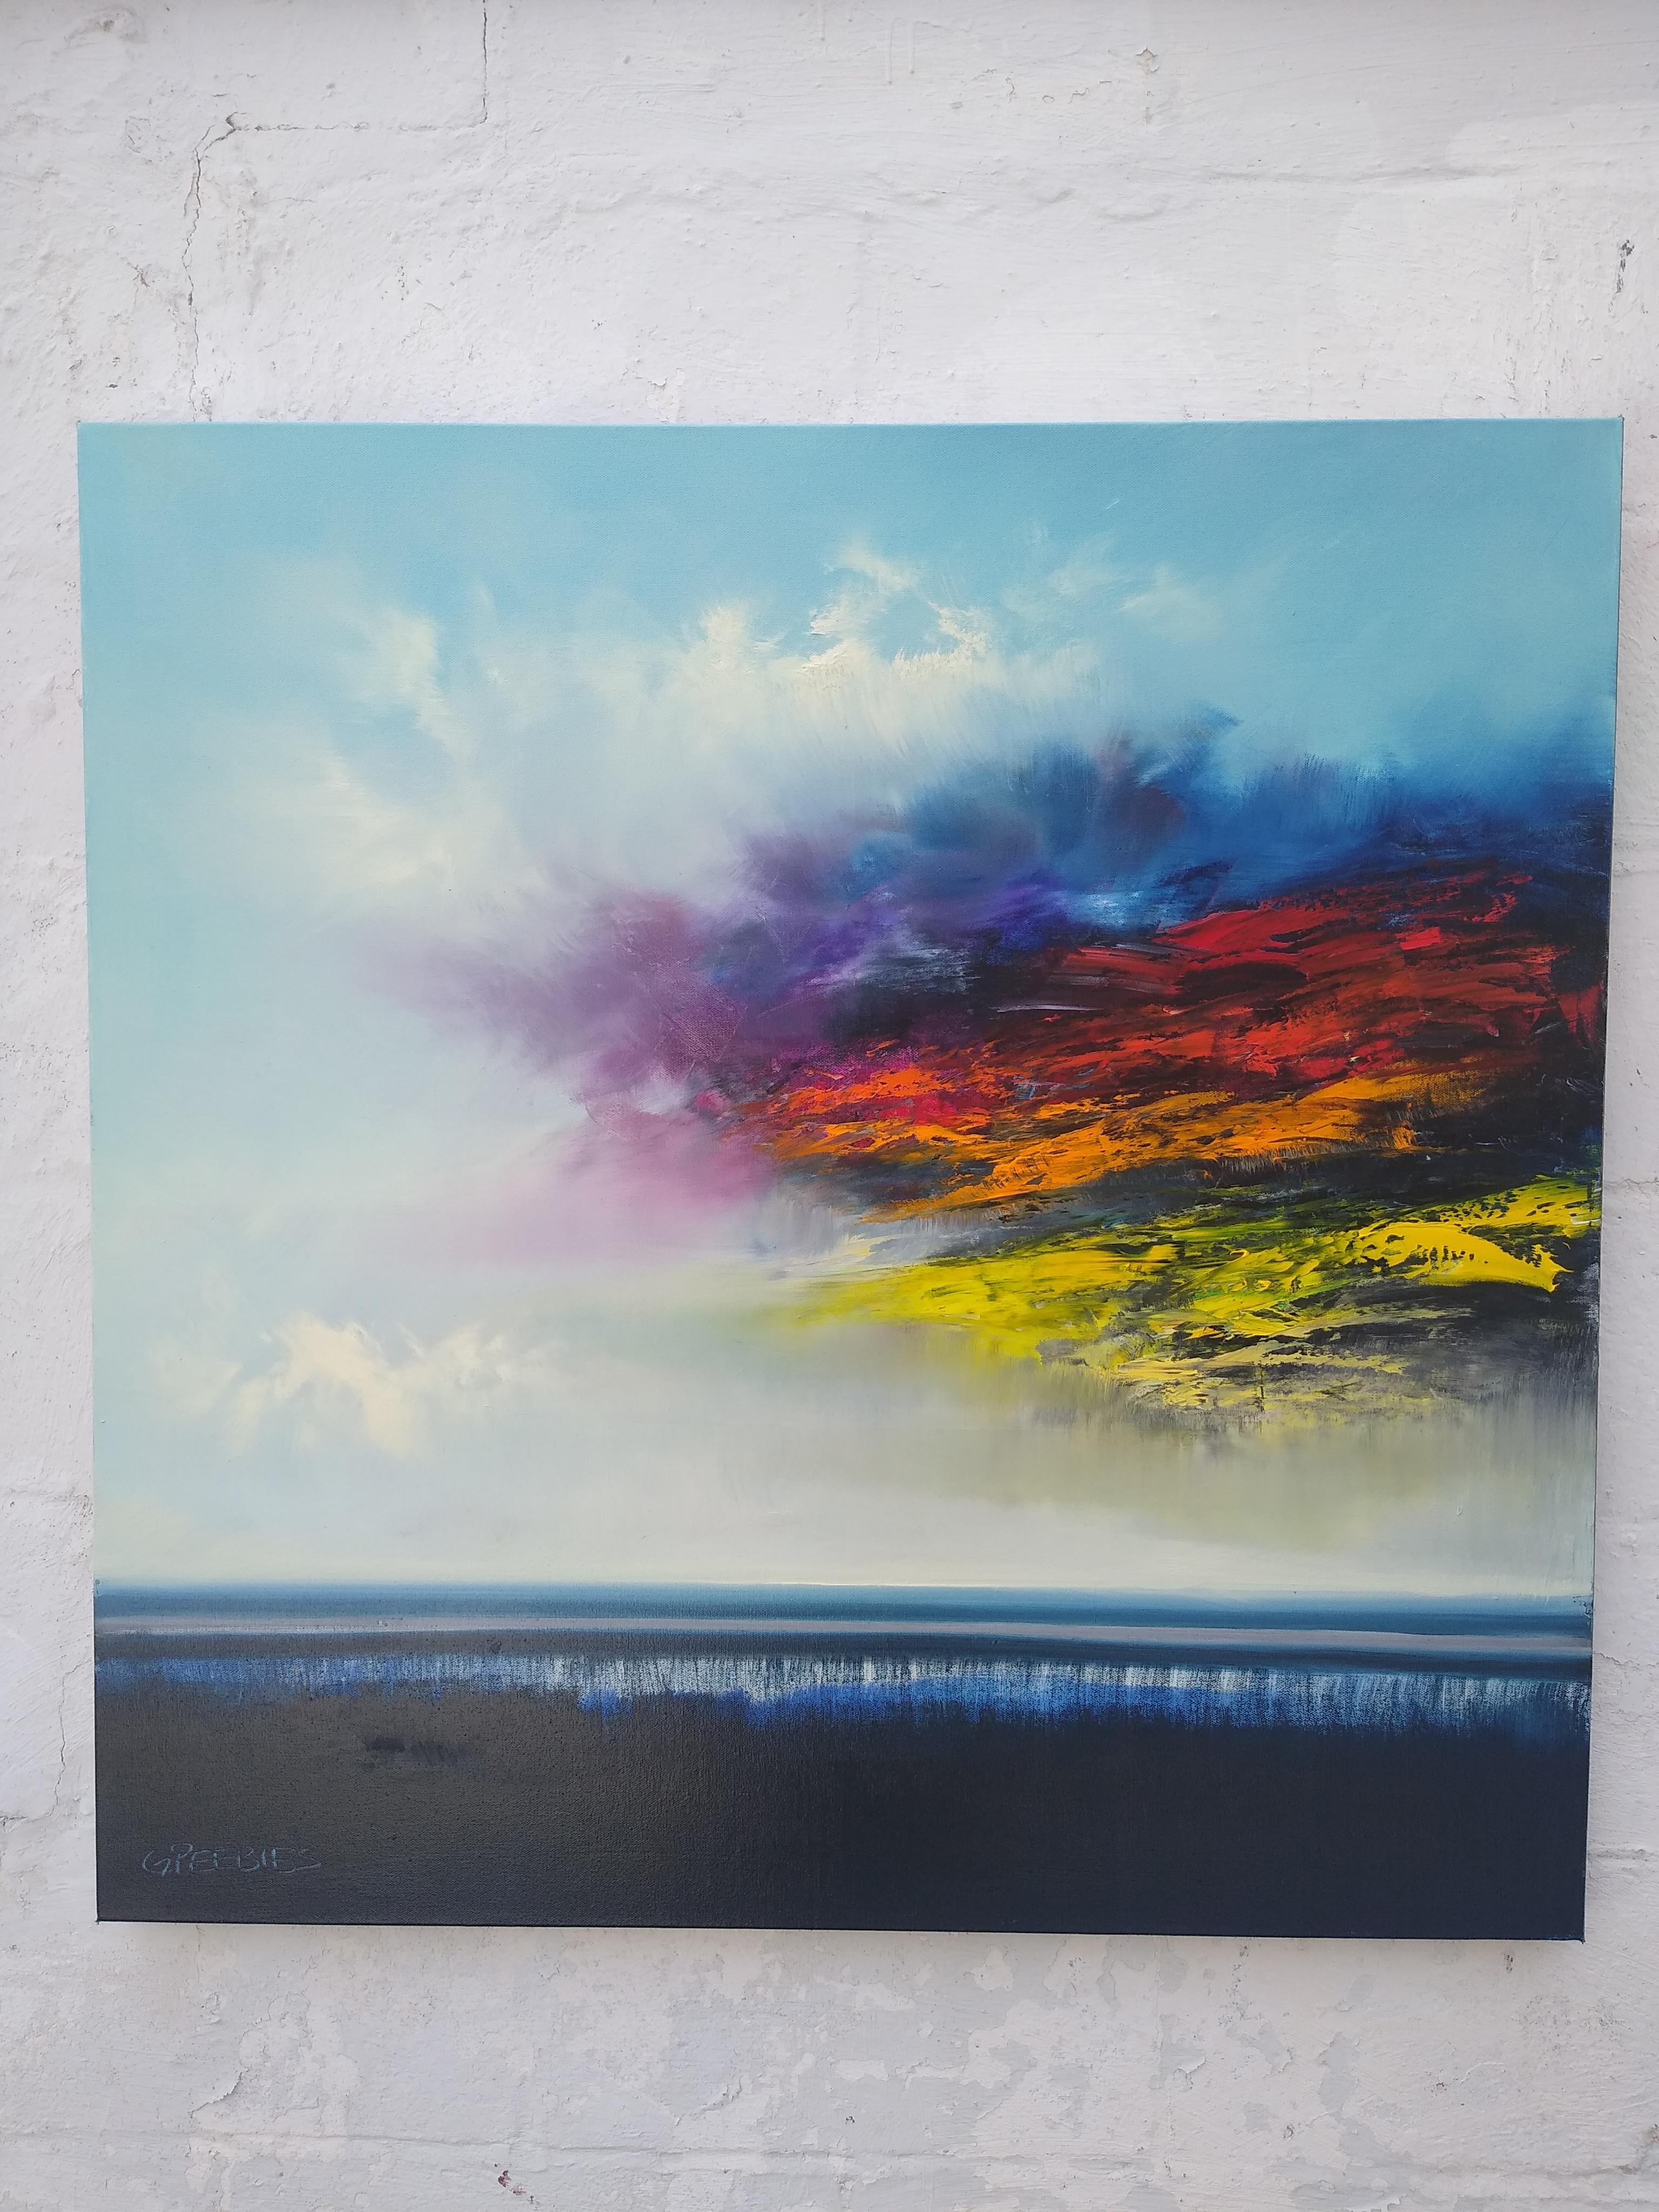 <p>Artist Comments<br>Artist George Peebles exhibits a captivating view of a dramatic landscape. The striking colors of a new day beautifully emerge from the sky. A stark contrast between the muted blue atmosphere and prismatic flares of